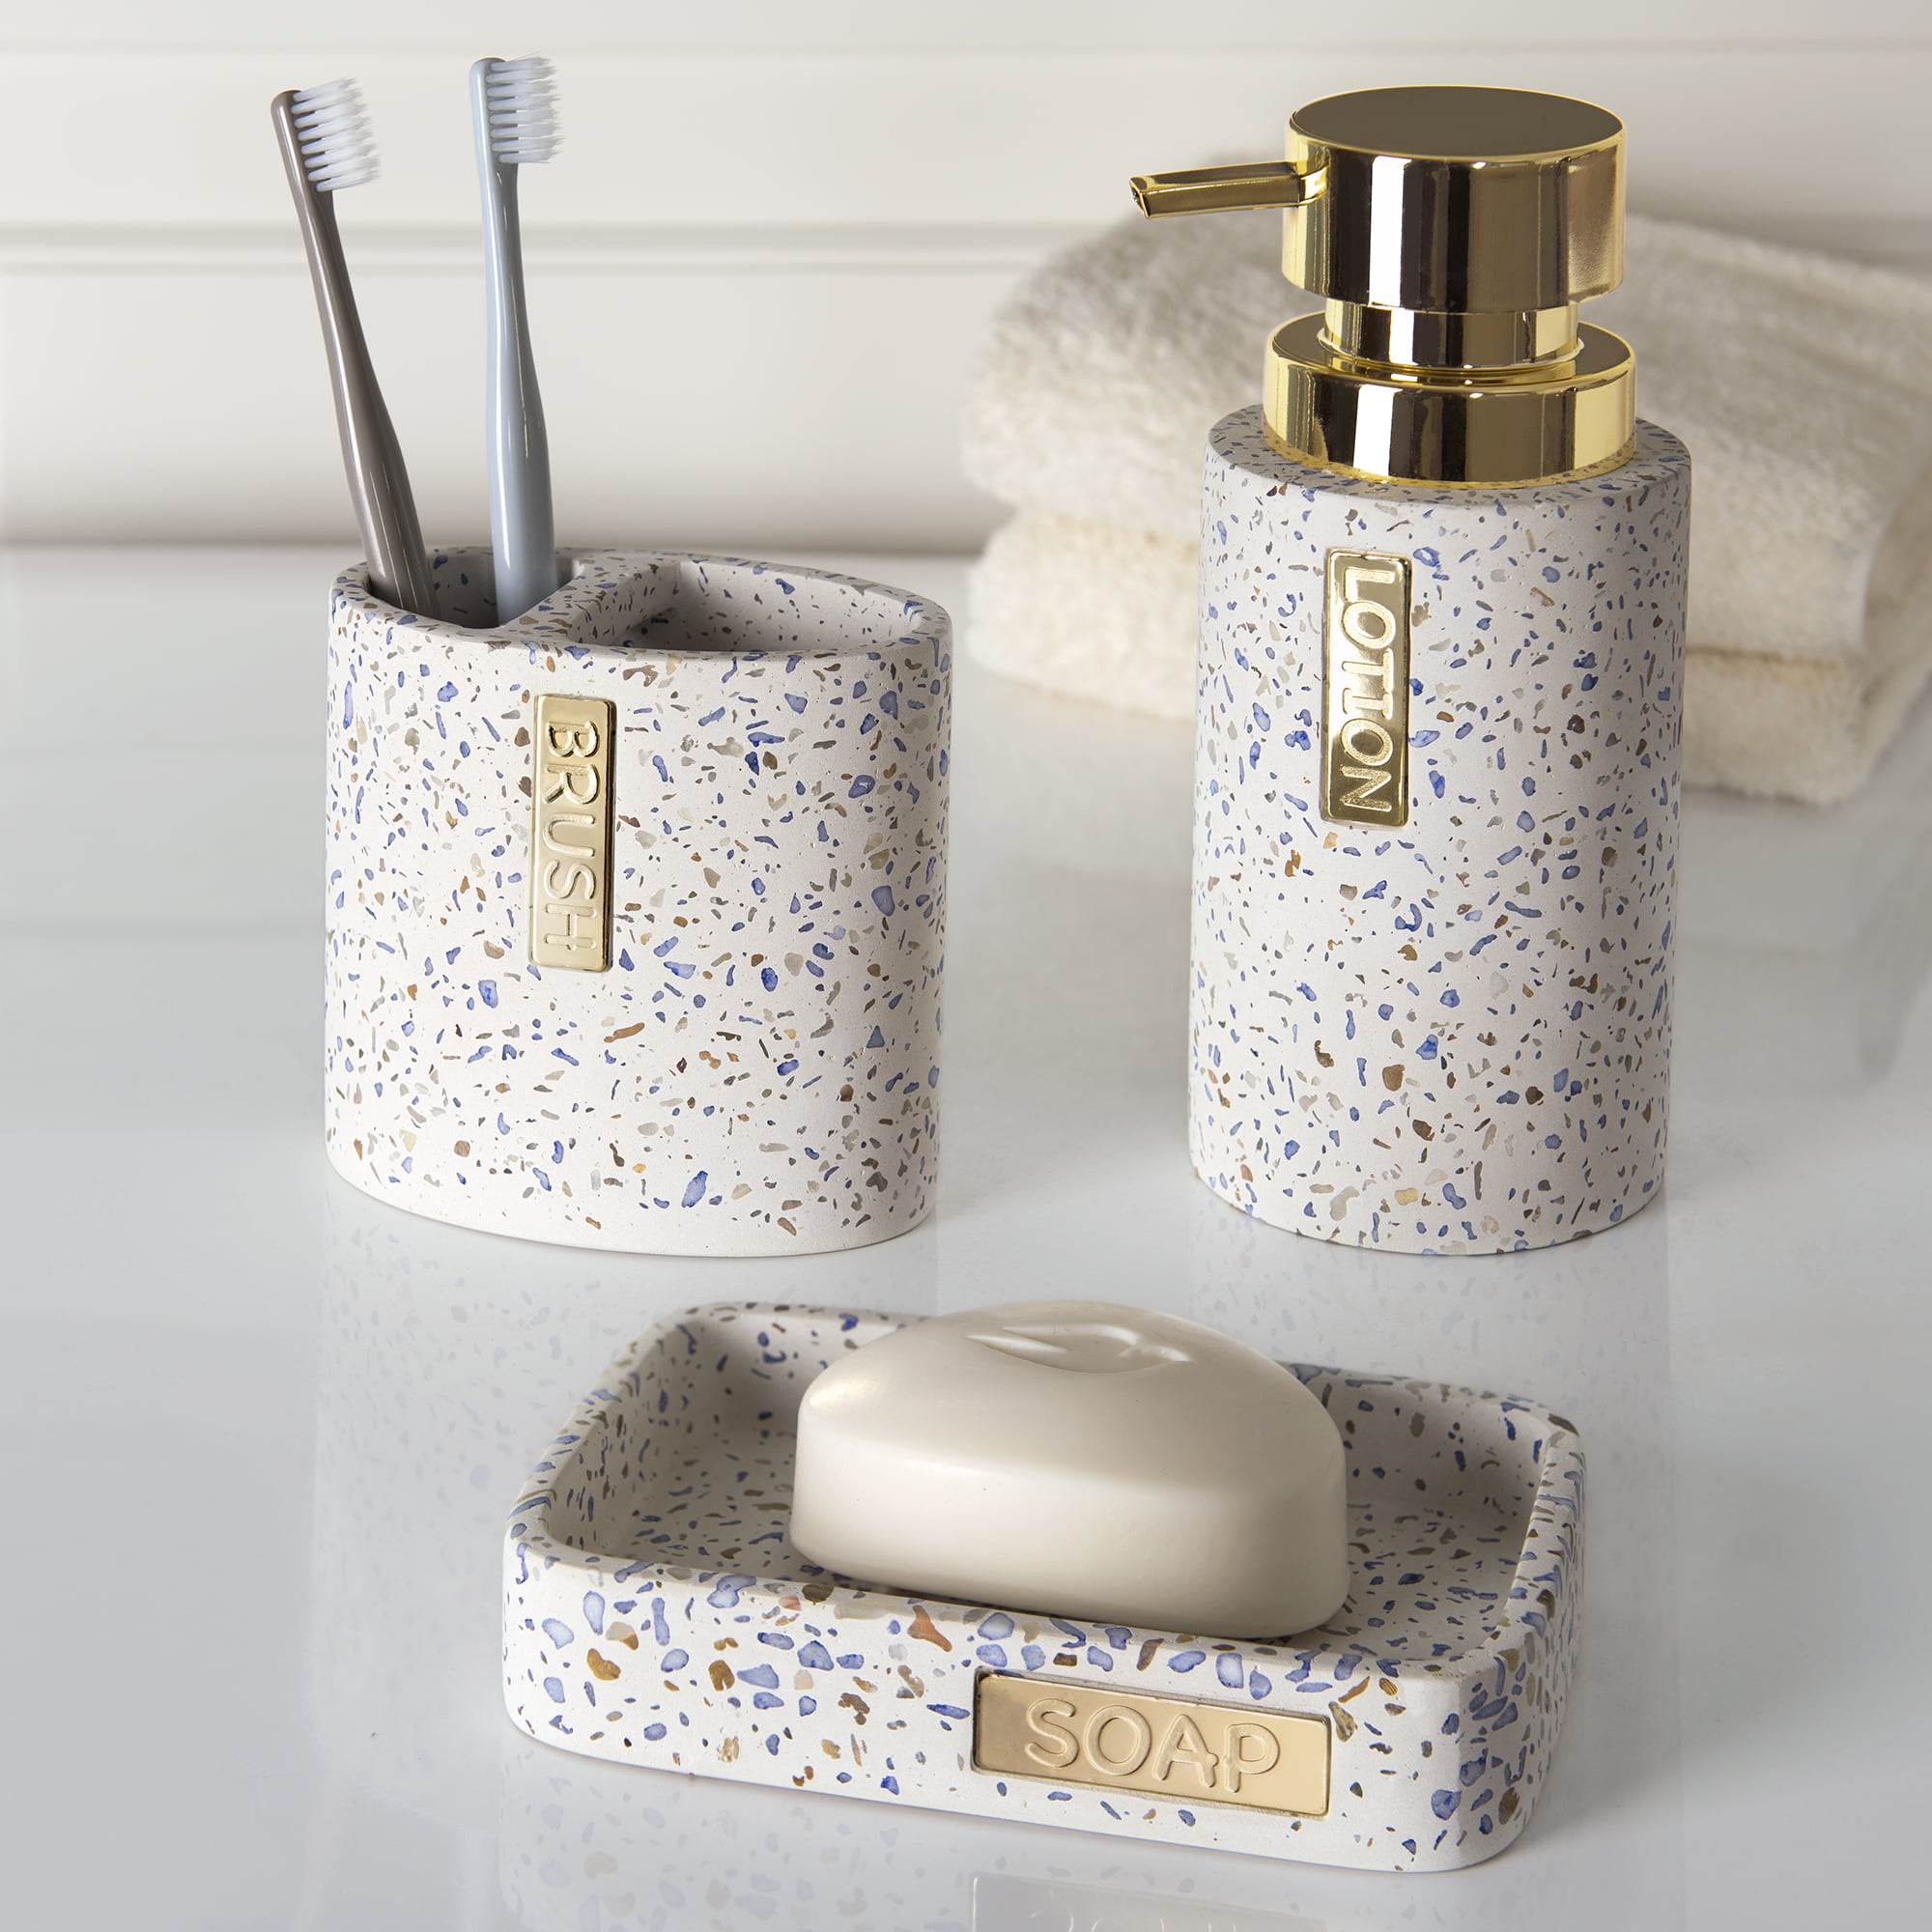 Mainstays 3 Piece Terrazzo with Gold Plate Cement Bath Accessory Set